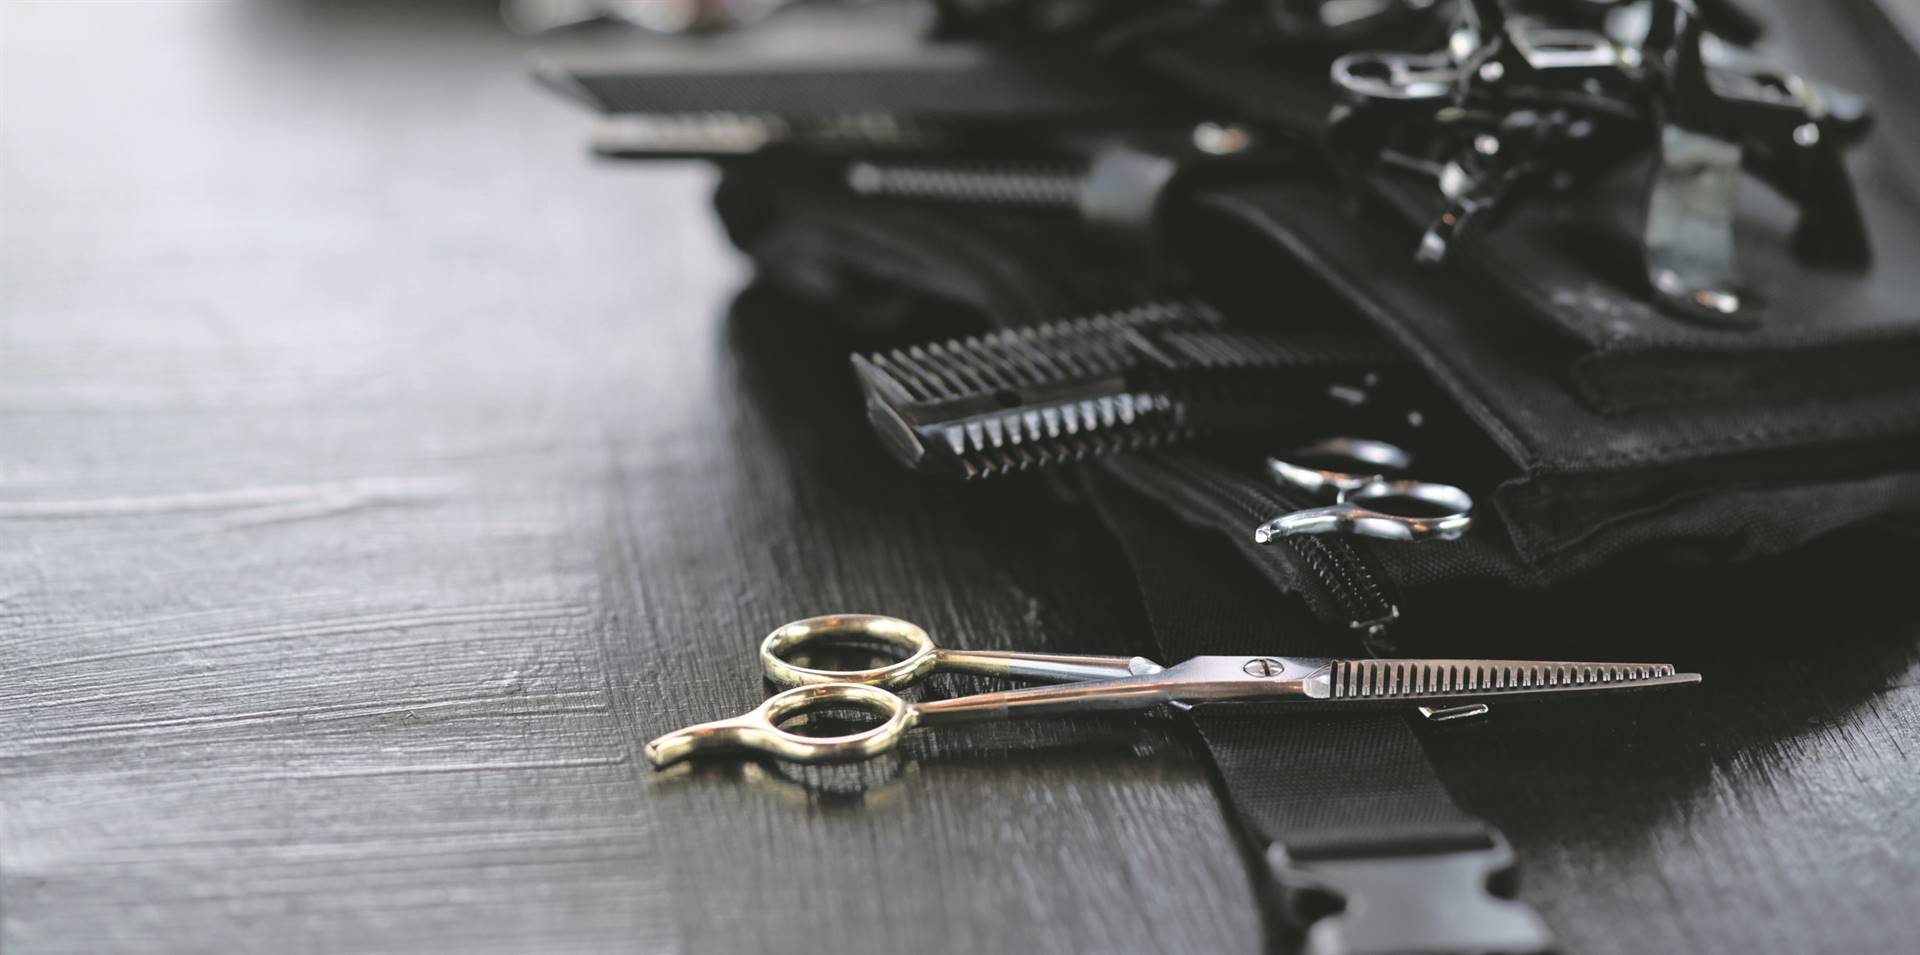 They work hard and are always on their feet, but hairdressers across the country have been left out in the cold by government’s lockdown regulationsPHOTO: istock